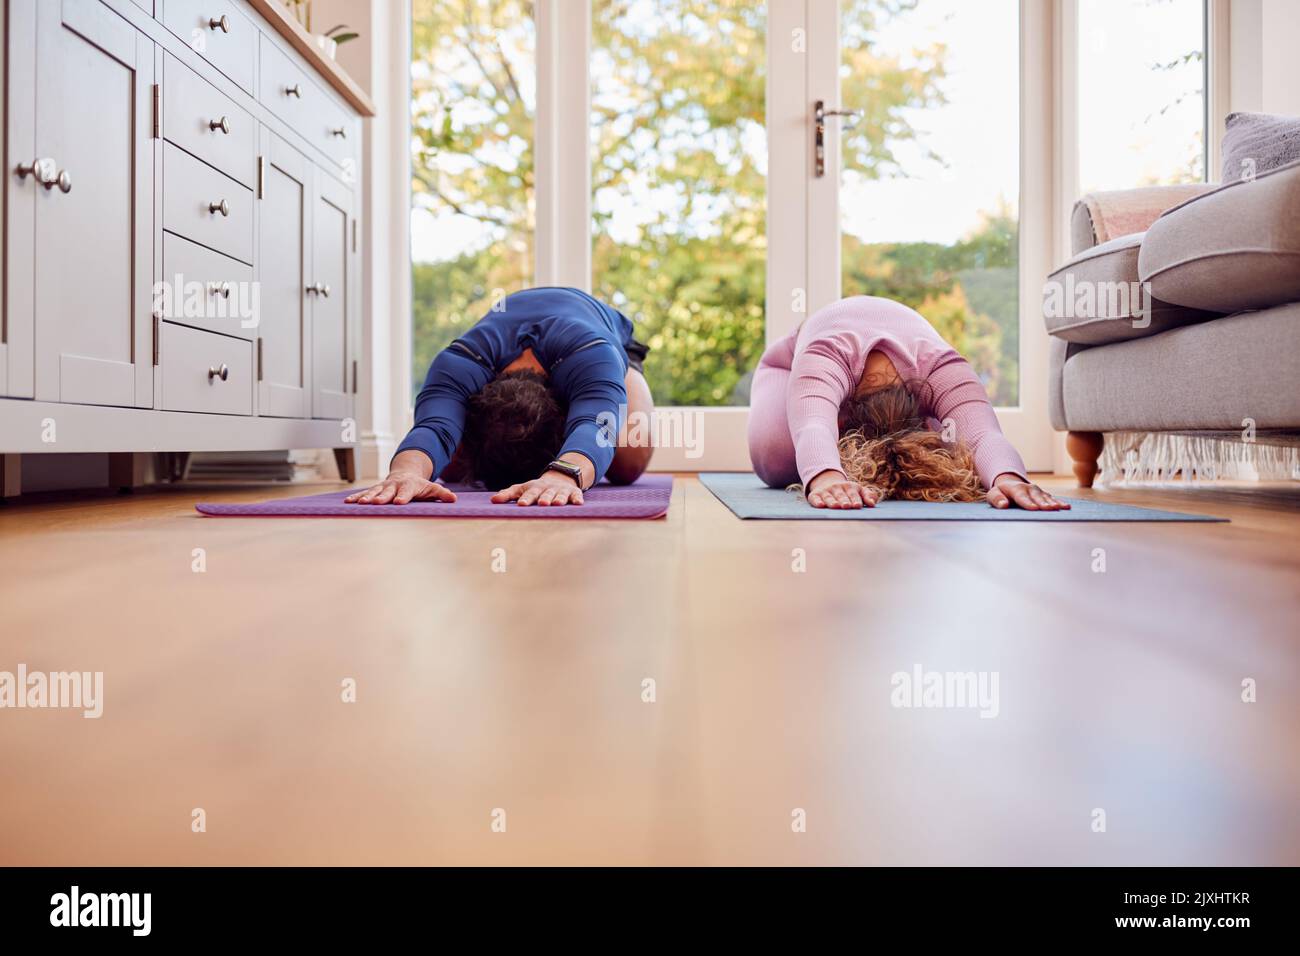 Couple Stretching On Mats At Home Doing Yoga Exercises Together Stock Photo